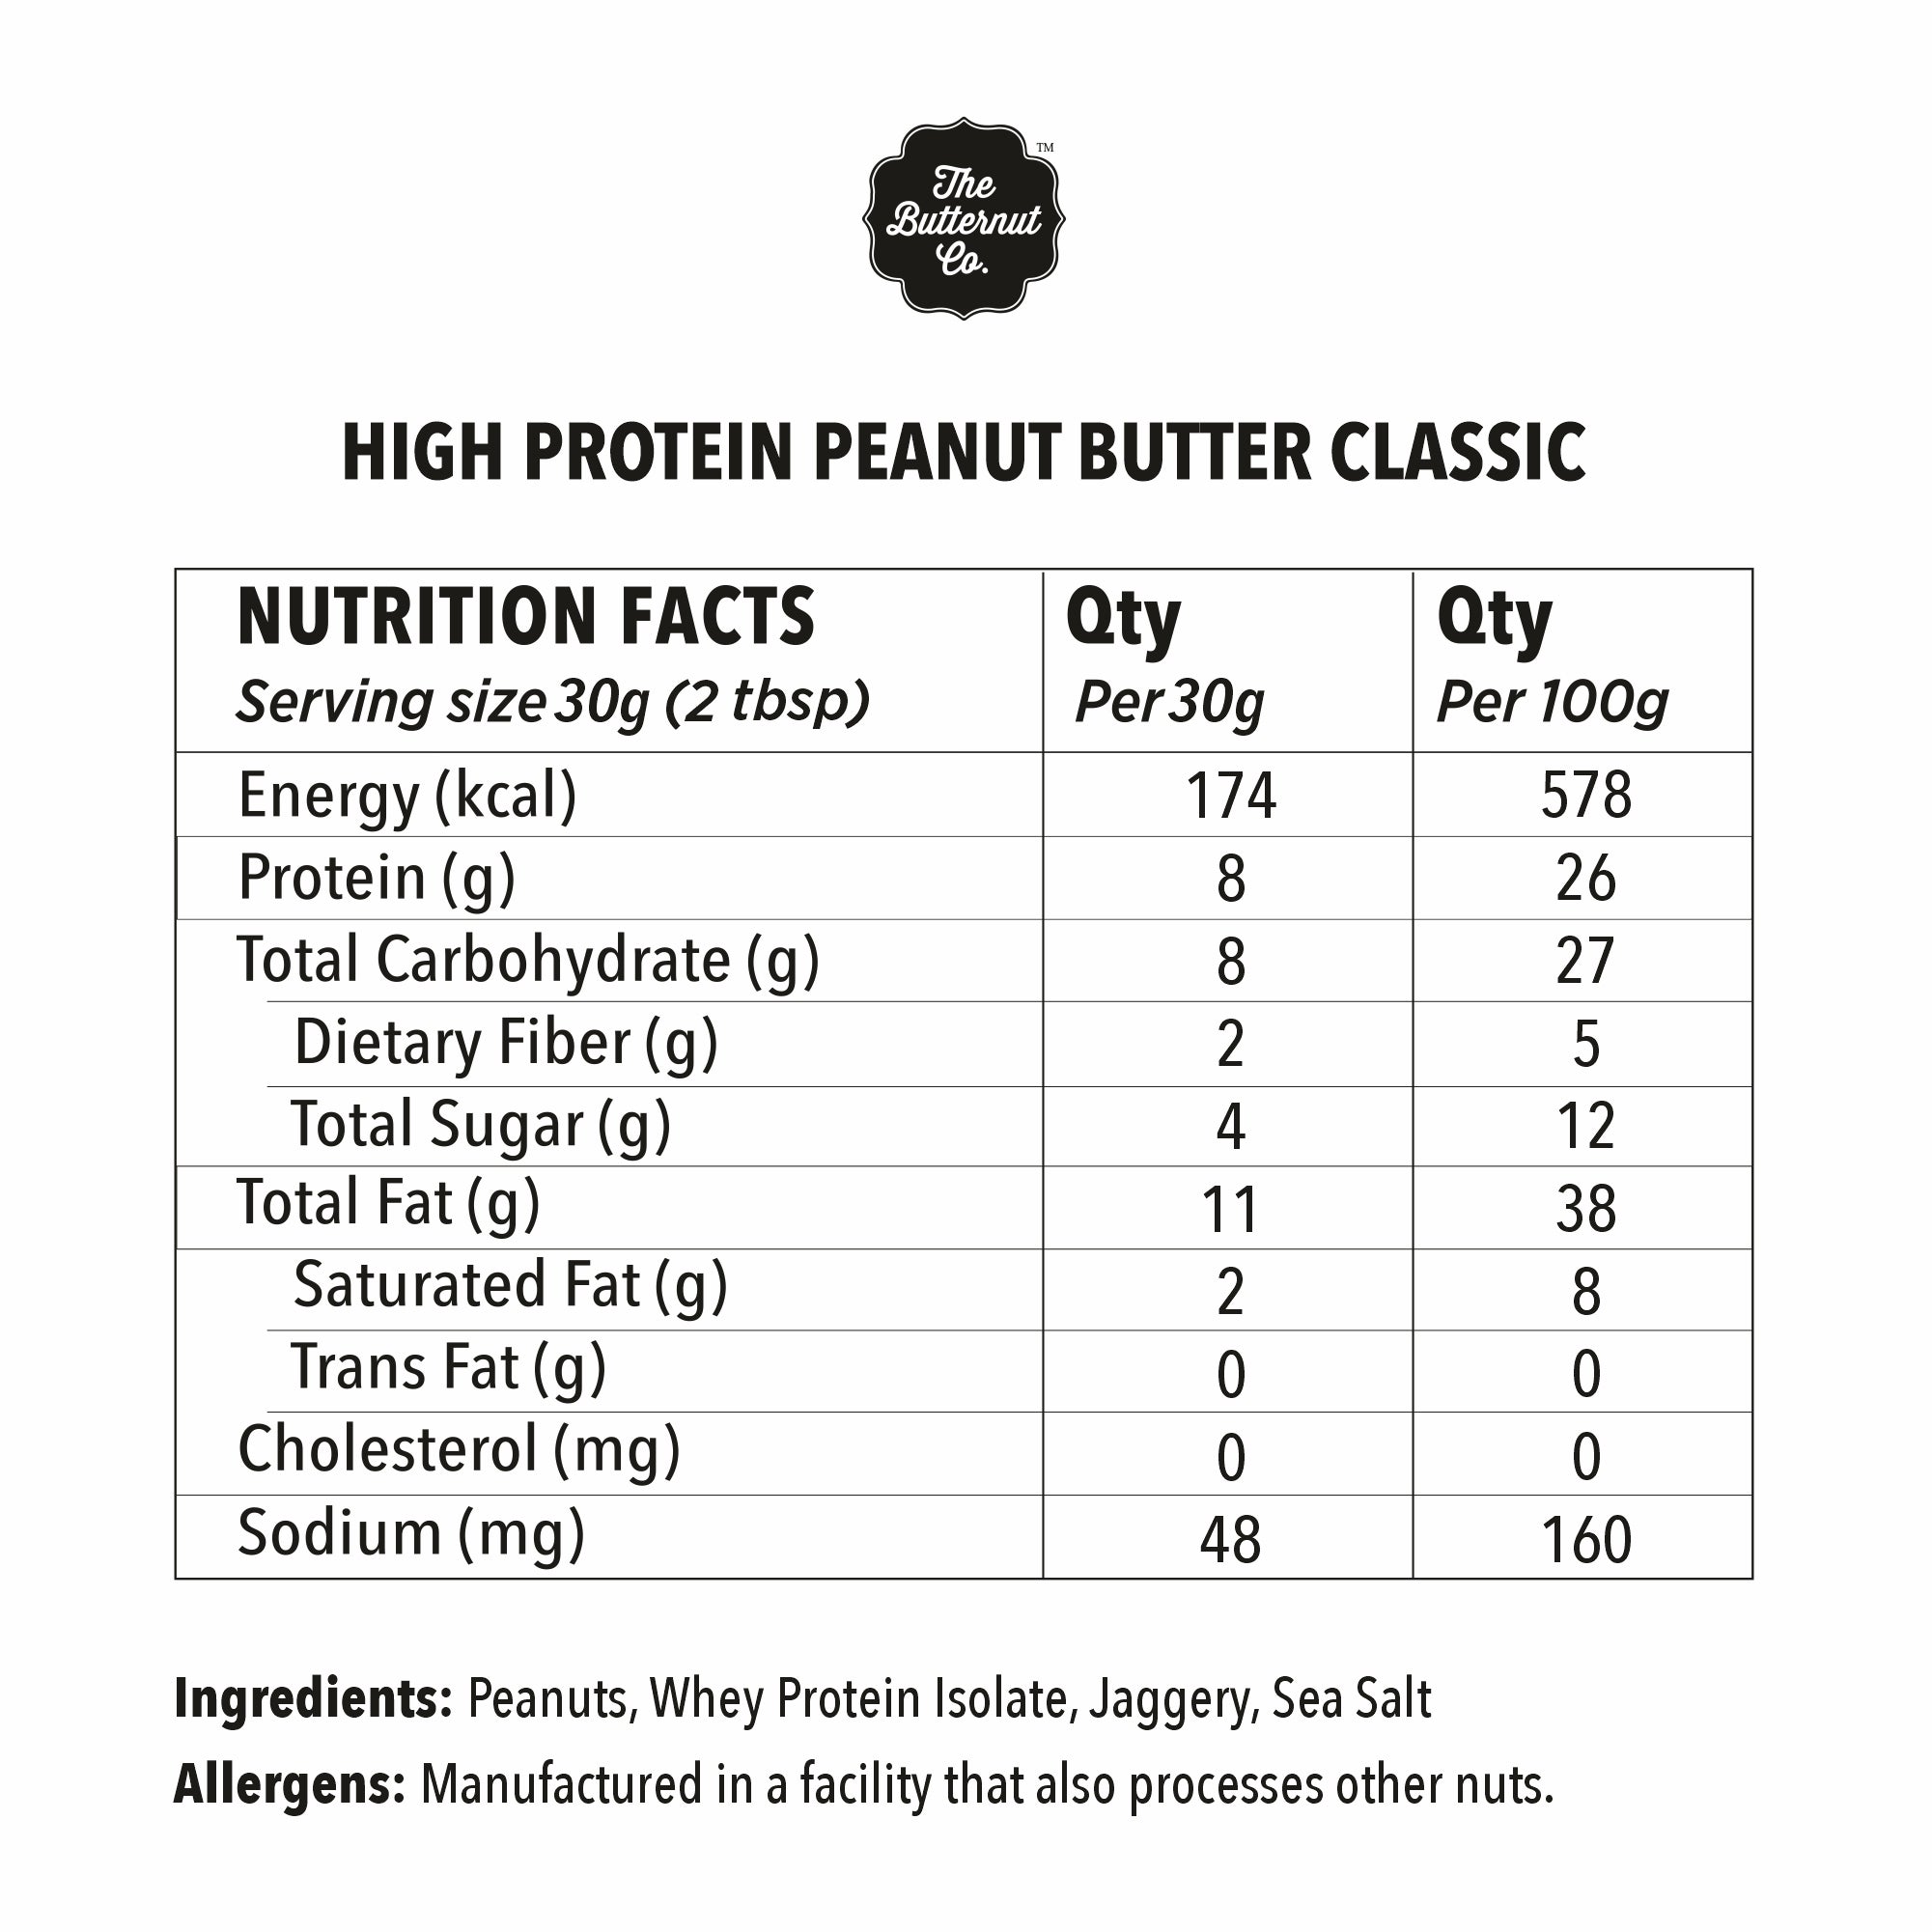 The Butternut Co. Protein Classic Peanut Butter